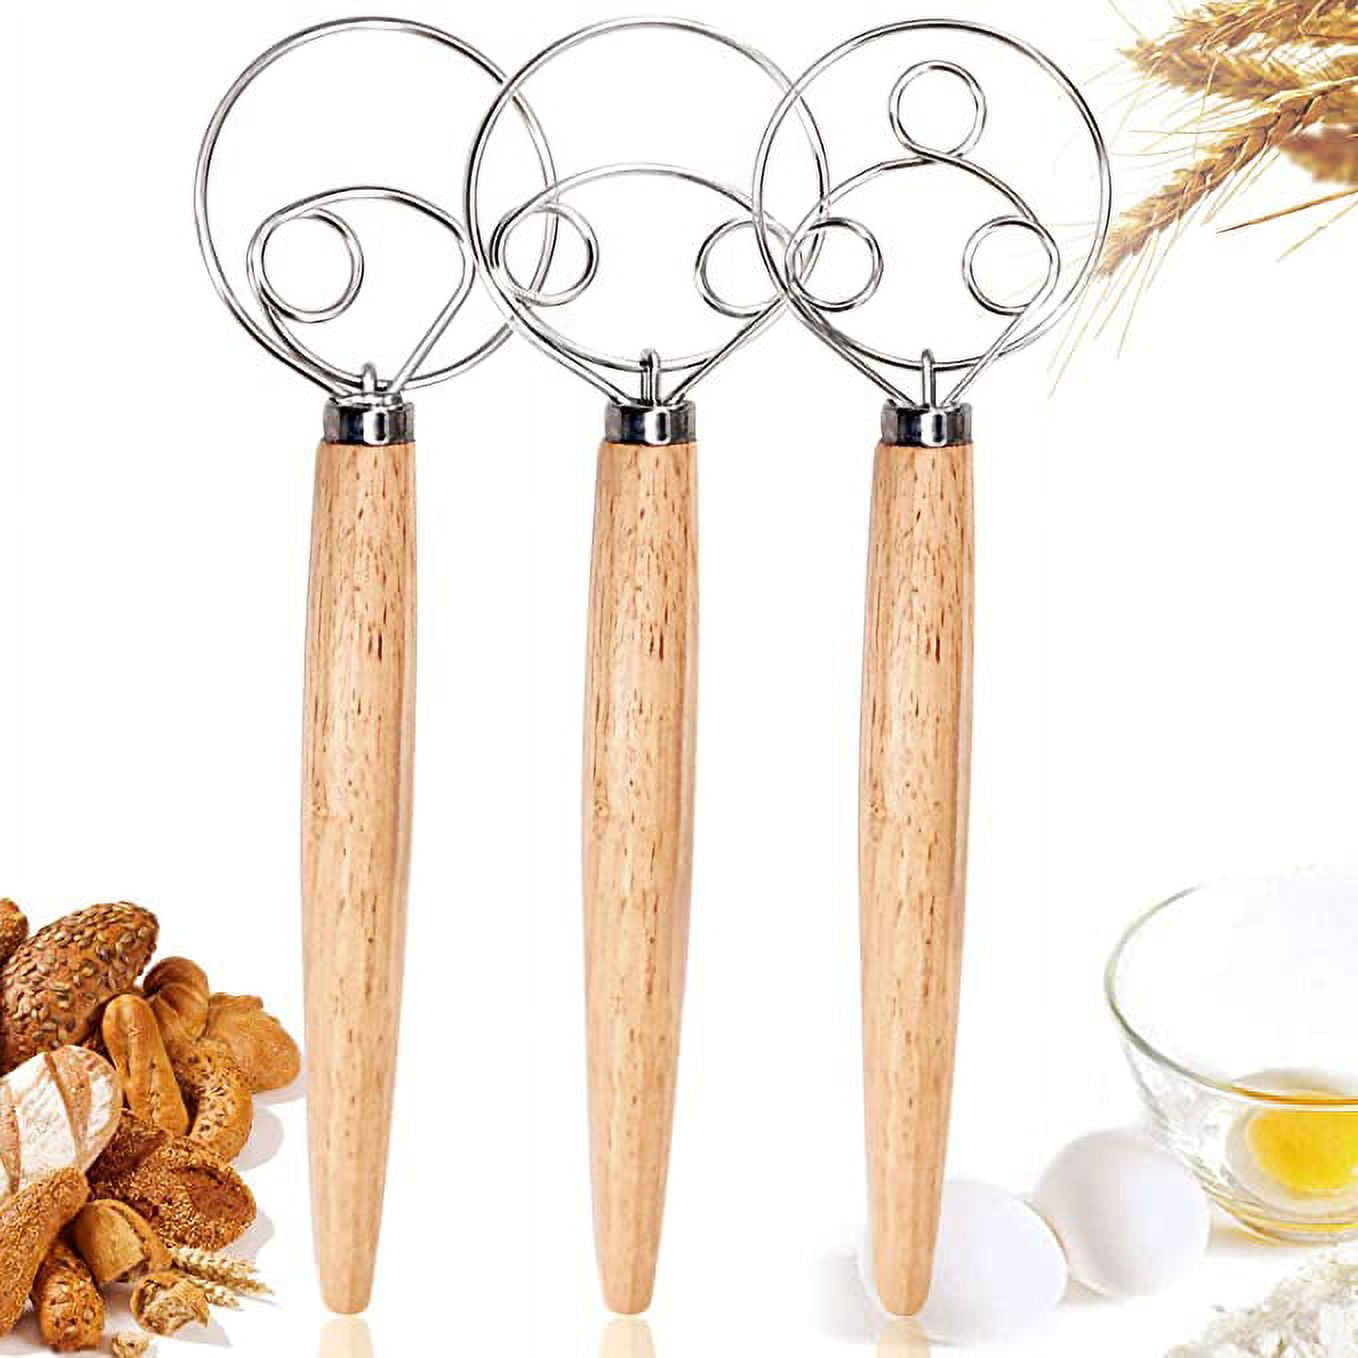 STAINLESS STEEL WHISK (SET OF 3 PIECES)  Homemade bread dough, Homemade  bread, Fluffy scrambled eggs